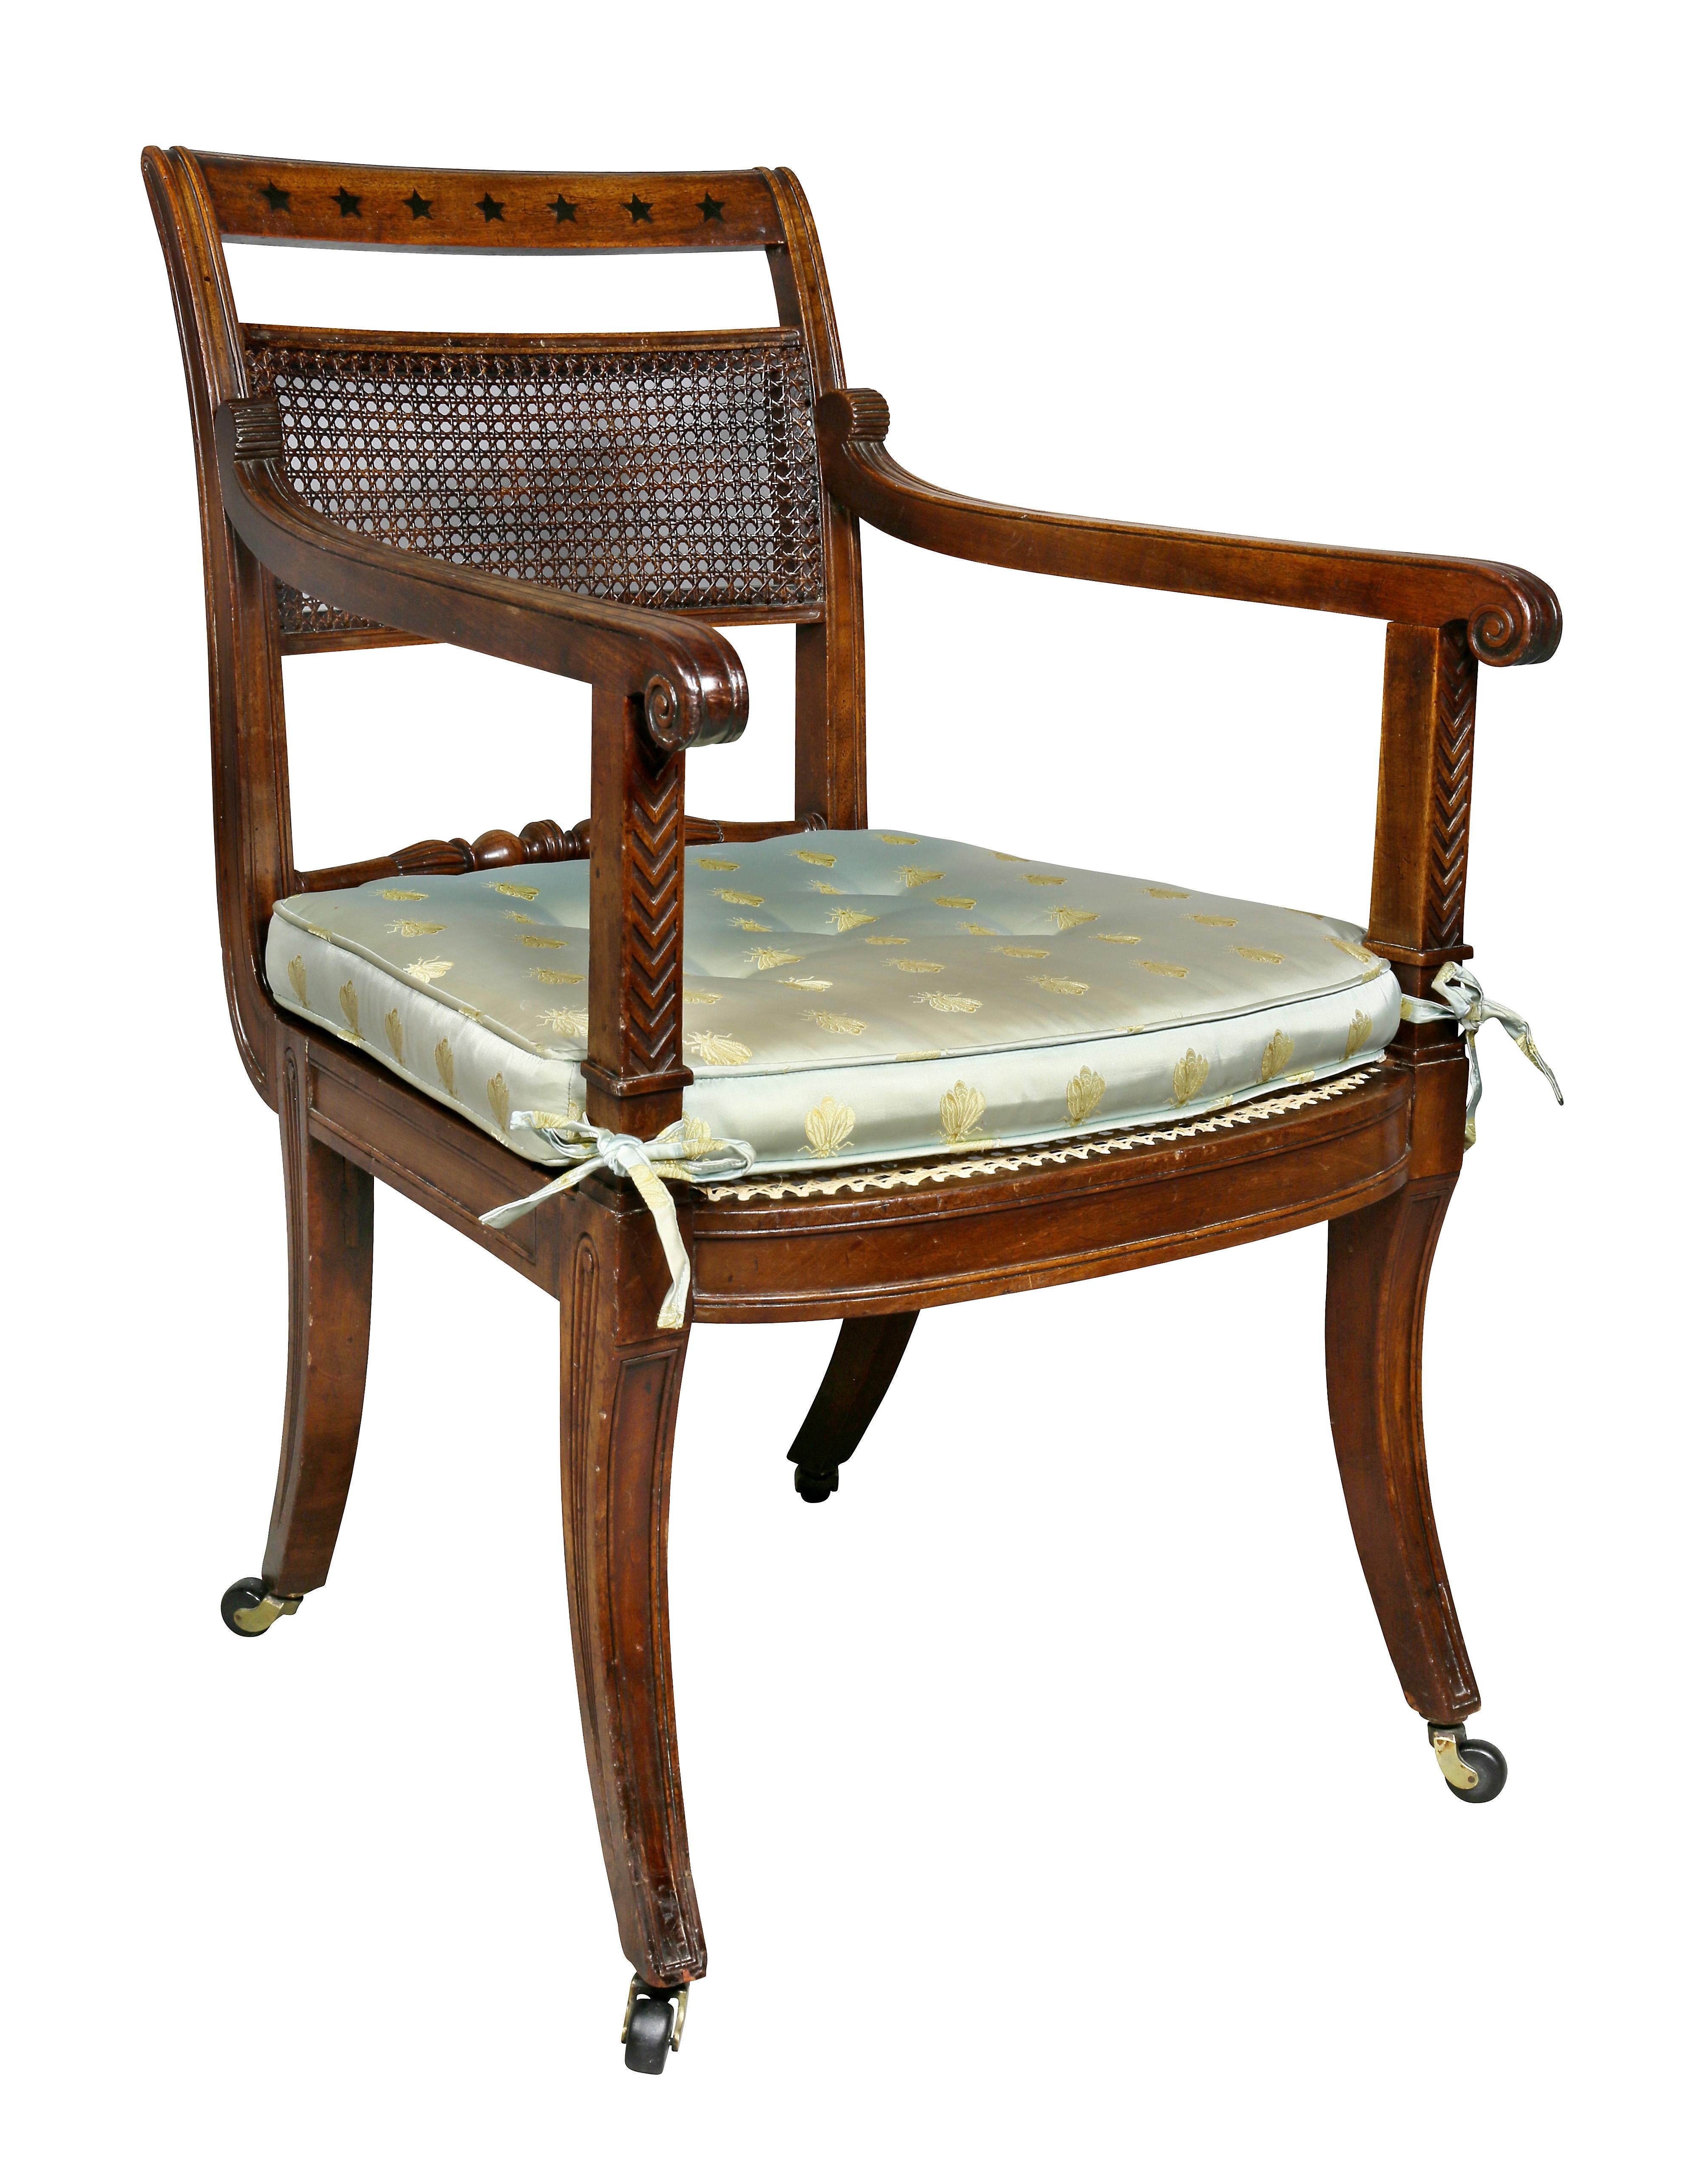 Very elegant chair with a tablet crestrail with star inlay , carved arms, caned back and seat , saber legs. Cushions available. Newly caned seat, would make a great desk chair. Provenance; Hyde Park Antiques.